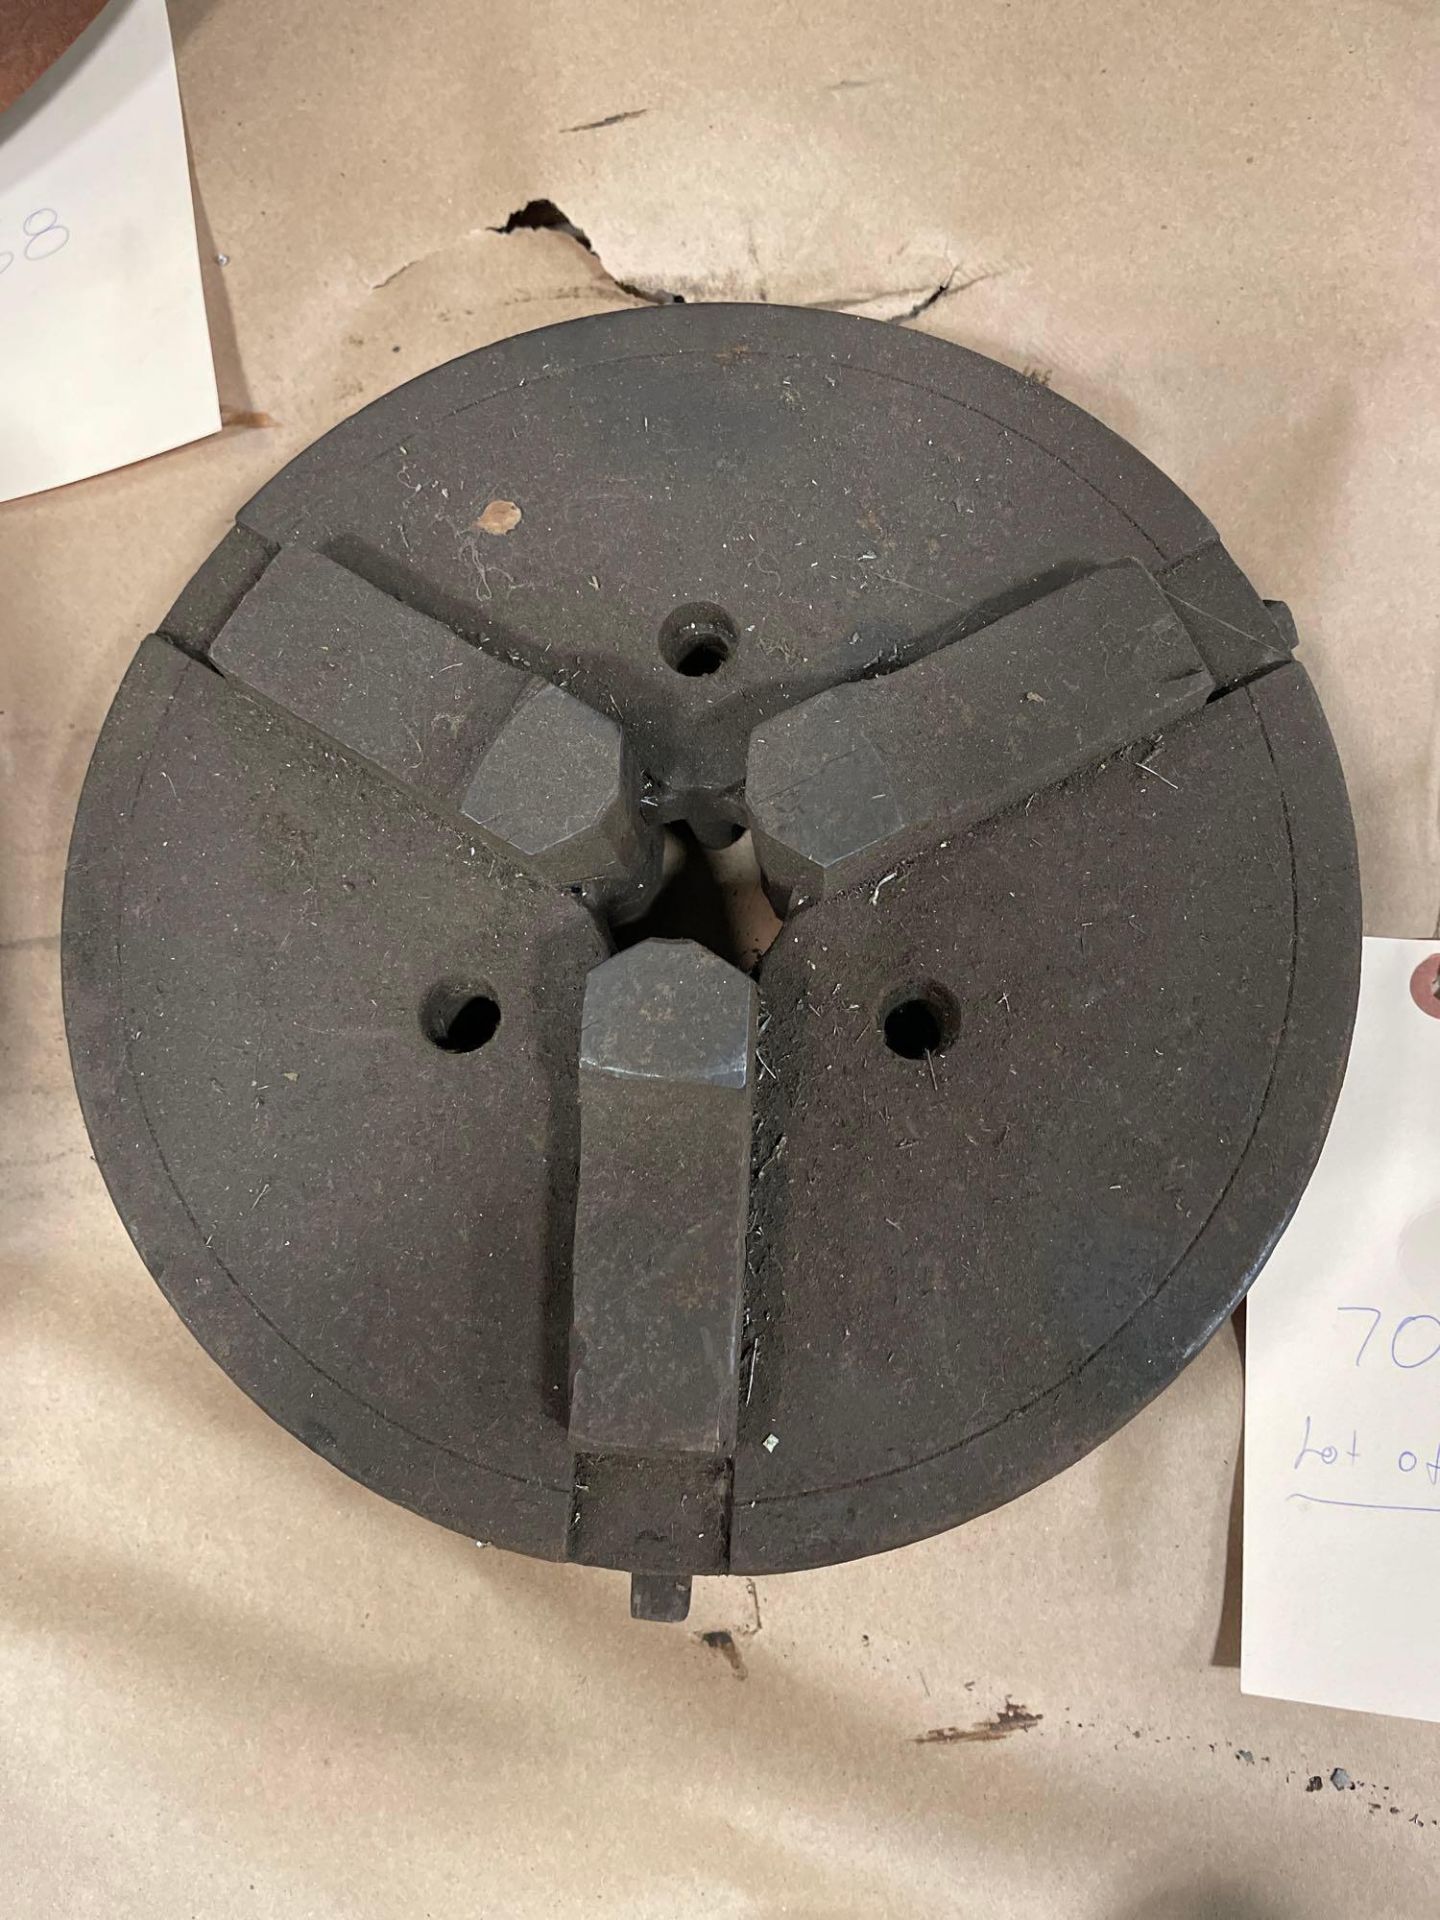 Lot of 3 Chucks: (1) 8" 3-Jaw Chuck, (1) 10" 3-Jaw Chuck, (1) 10" 3-Jaw Chuck - Image 4 of 7